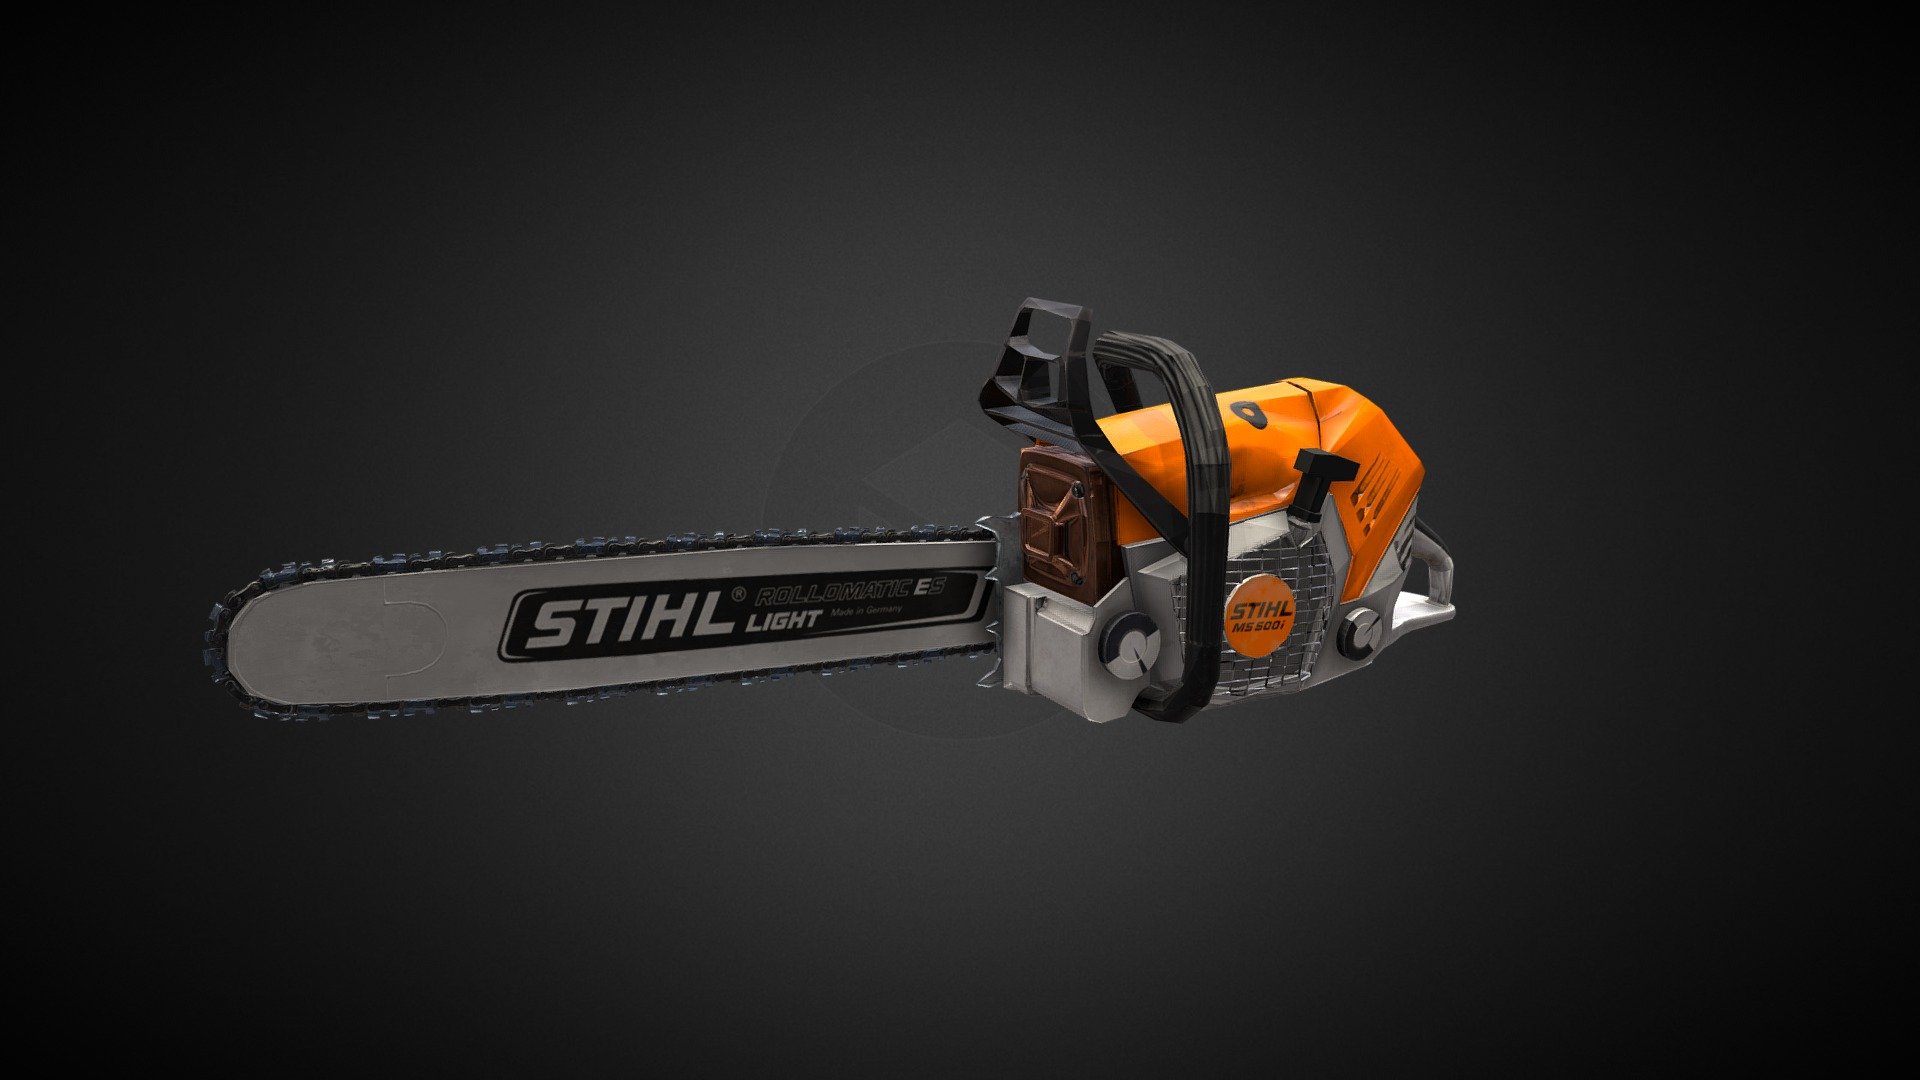 Designed and built exclusively for forestry personnel and tree service professionals, the MS 500i is the first ever chainsaw on the worldwide market with electronically controlled fuel injection. With its excellent power-to-weight ratio, this saw is an impressive piece of equipment for pros looking to take on tree felling, bucking or delimbing operations. Thanks to its unique fuel injection system, the MS 500i delivers rapid acceleration. Combining innovative technology with world-class engineering and durable construction, the MS 500i is another great addition to the long line of legendary STIHL chainsaws 3d model